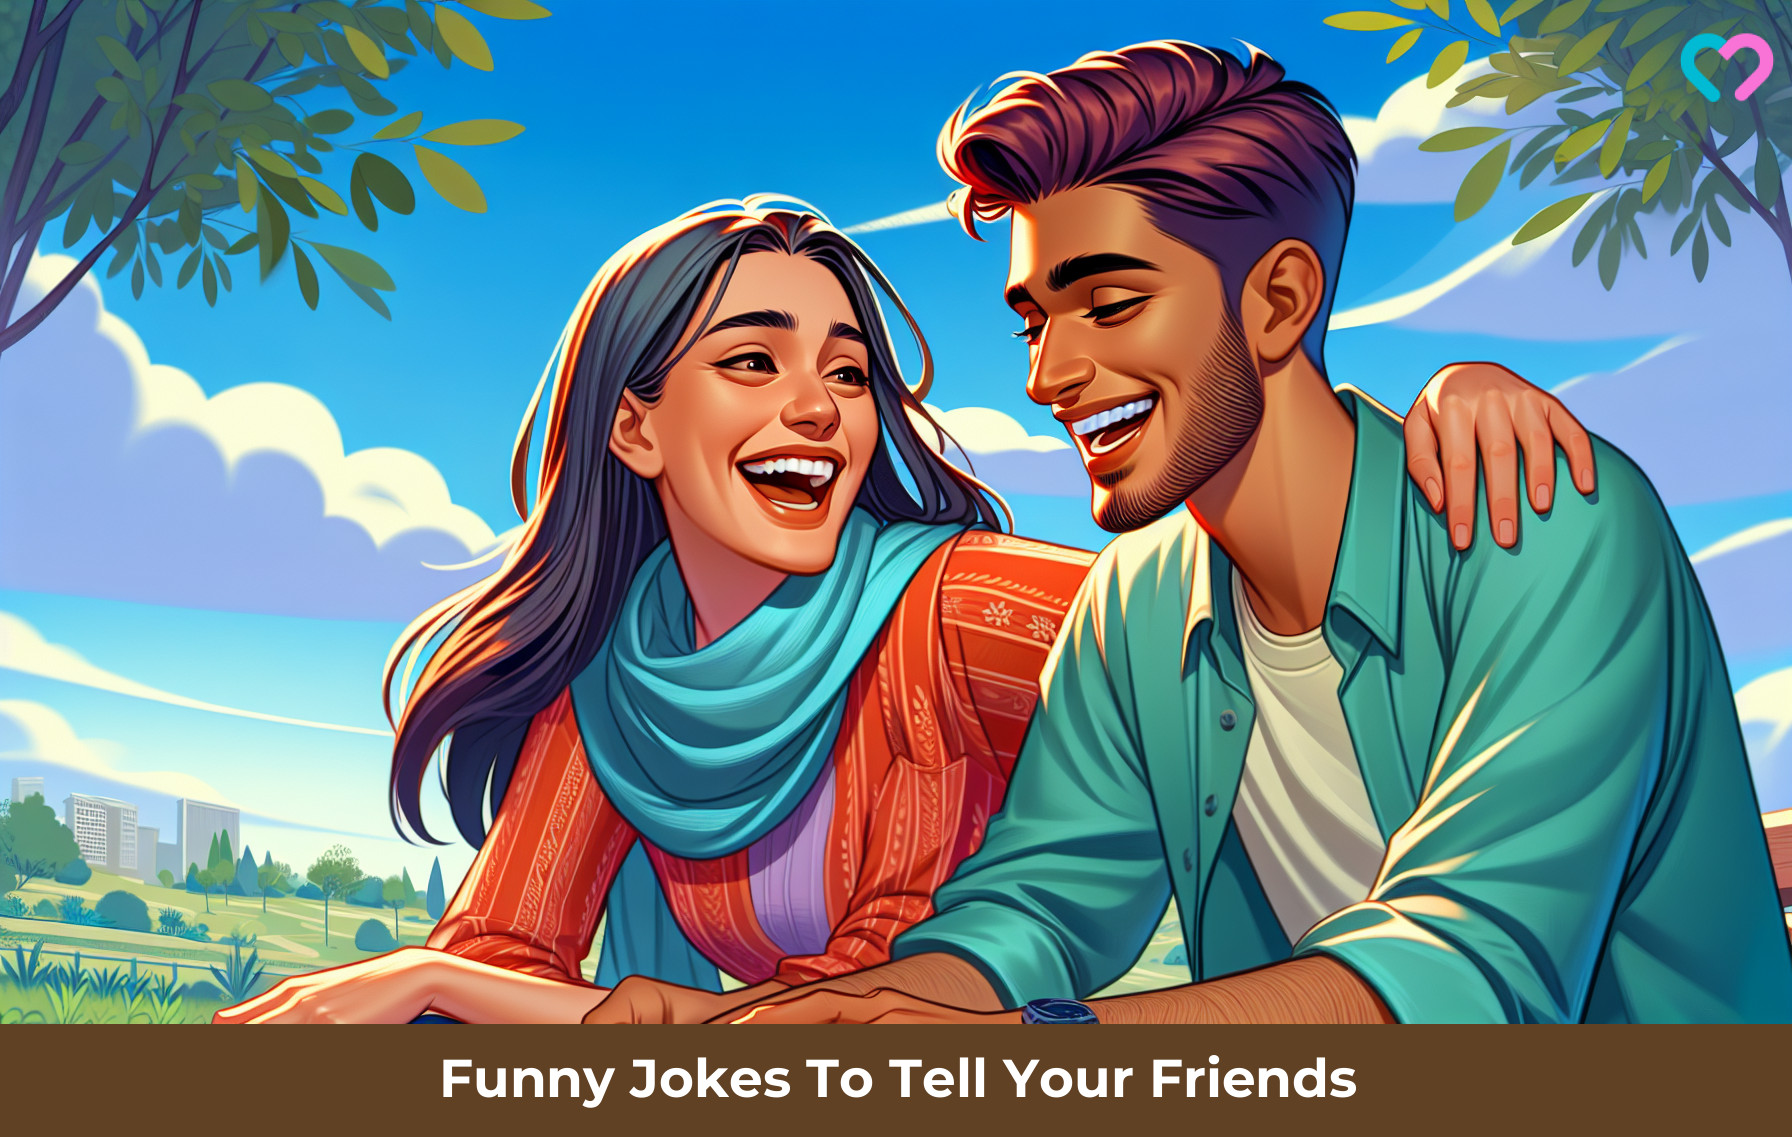 Jokes To Tell Your Friends_illustration